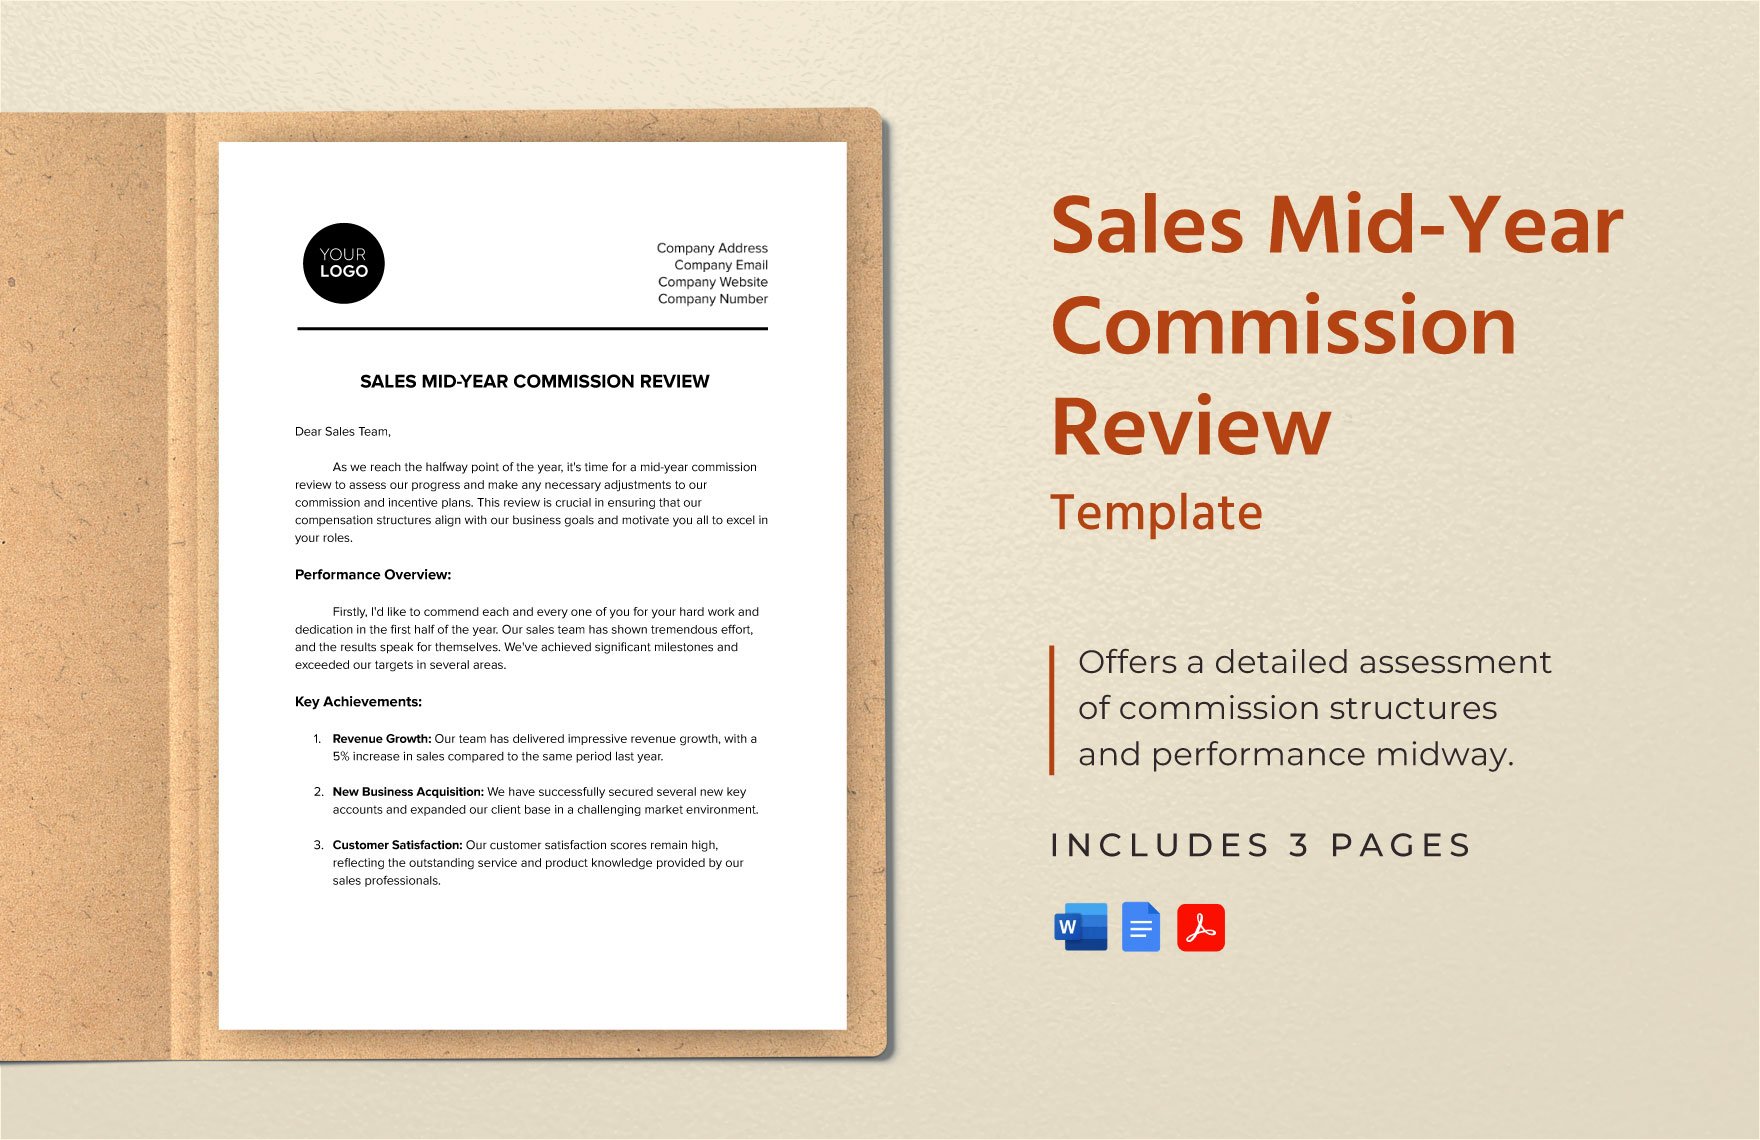 Sales Mid-Year Commission Review Template